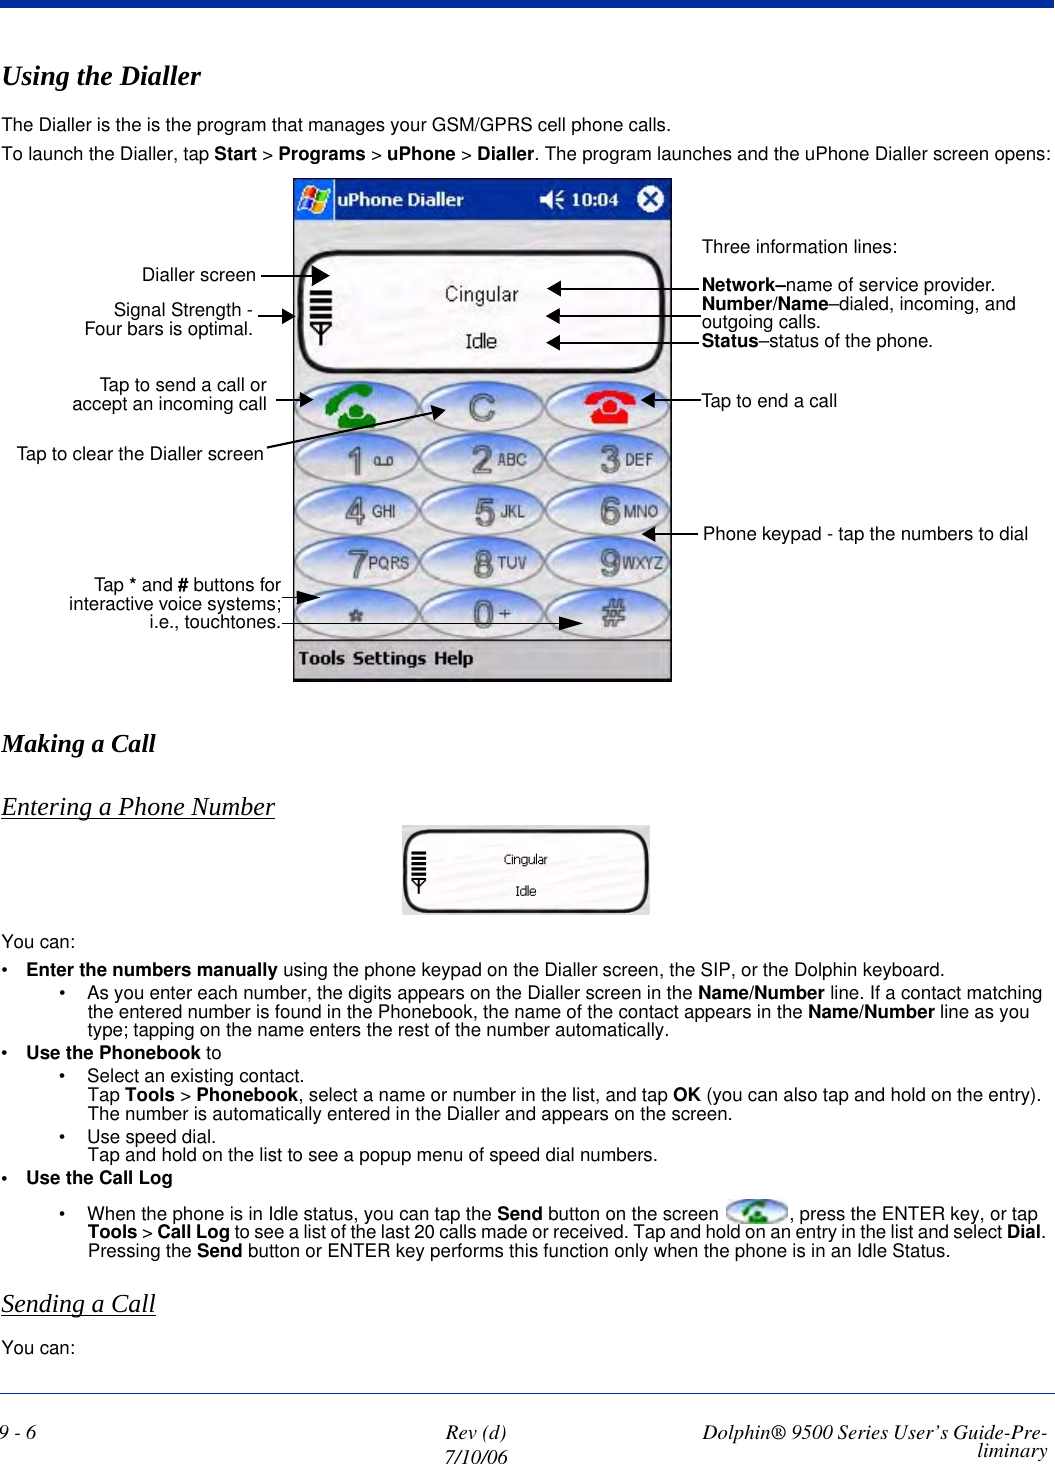 9 - 6 Rev (d)7/10/06 Dolphin® 9500 Series User’s Guide-Pre-liminaryUsing the DiallerThe Dialler is the is the program that manages your GSM/GPRS cell phone calls.To launch the Dialler, tap Start &gt; Programs &gt; uPhone &gt; Dialler. The program launches and the uPhone Dialler screen opens:Making a CallEntering a Phone NumberYou can:•Enter the numbers manually using the phone keypad on the Dialler screen, the SIP, or the Dolphin keyboard. • As you enter each number, the digits appears on the Dialler screen in the Name/Number line. If a contact matching the entered number is found in the Phonebook, the name of the contact appears in the Name/Number line as you type; tapping on the name enters the rest of the number automatically.•Use the Phonebook to • Select an existing contact.Tap Tools &gt; Phonebook, select a name or number in the list, and tap OK (you can also tap and hold on the entry). The number is automatically entered in the Dialler and appears on the screen.• Use speed dial. Tap and hold on the list to see a popup menu of speed dial numbers.• Use the Call Log• When the phone is in Idle status, you can tap the Send button on the screen  , press the ENTER key, or tap Tools &gt; Call Log to see a list of the last 20 calls made or received. Tap and hold on an entry in the list and select Dial. Pressing the Send button or ENTER key performs this function only when the phone is in an Idle Status.Sending a CallYou can:Three information lines:Network–name of service provider.Number/Name–dialed, incoming, and outgoing calls.Status–status of the phone.Tap to end a callPhone keypad - tap the numbers to dialSignal Strength -Four bars is optimal.Tap to send a call oraccept an incoming callDialler screenTap to clear the Dialler screenTap * and # buttons forinteractive voice systems;i.e., touchtones.